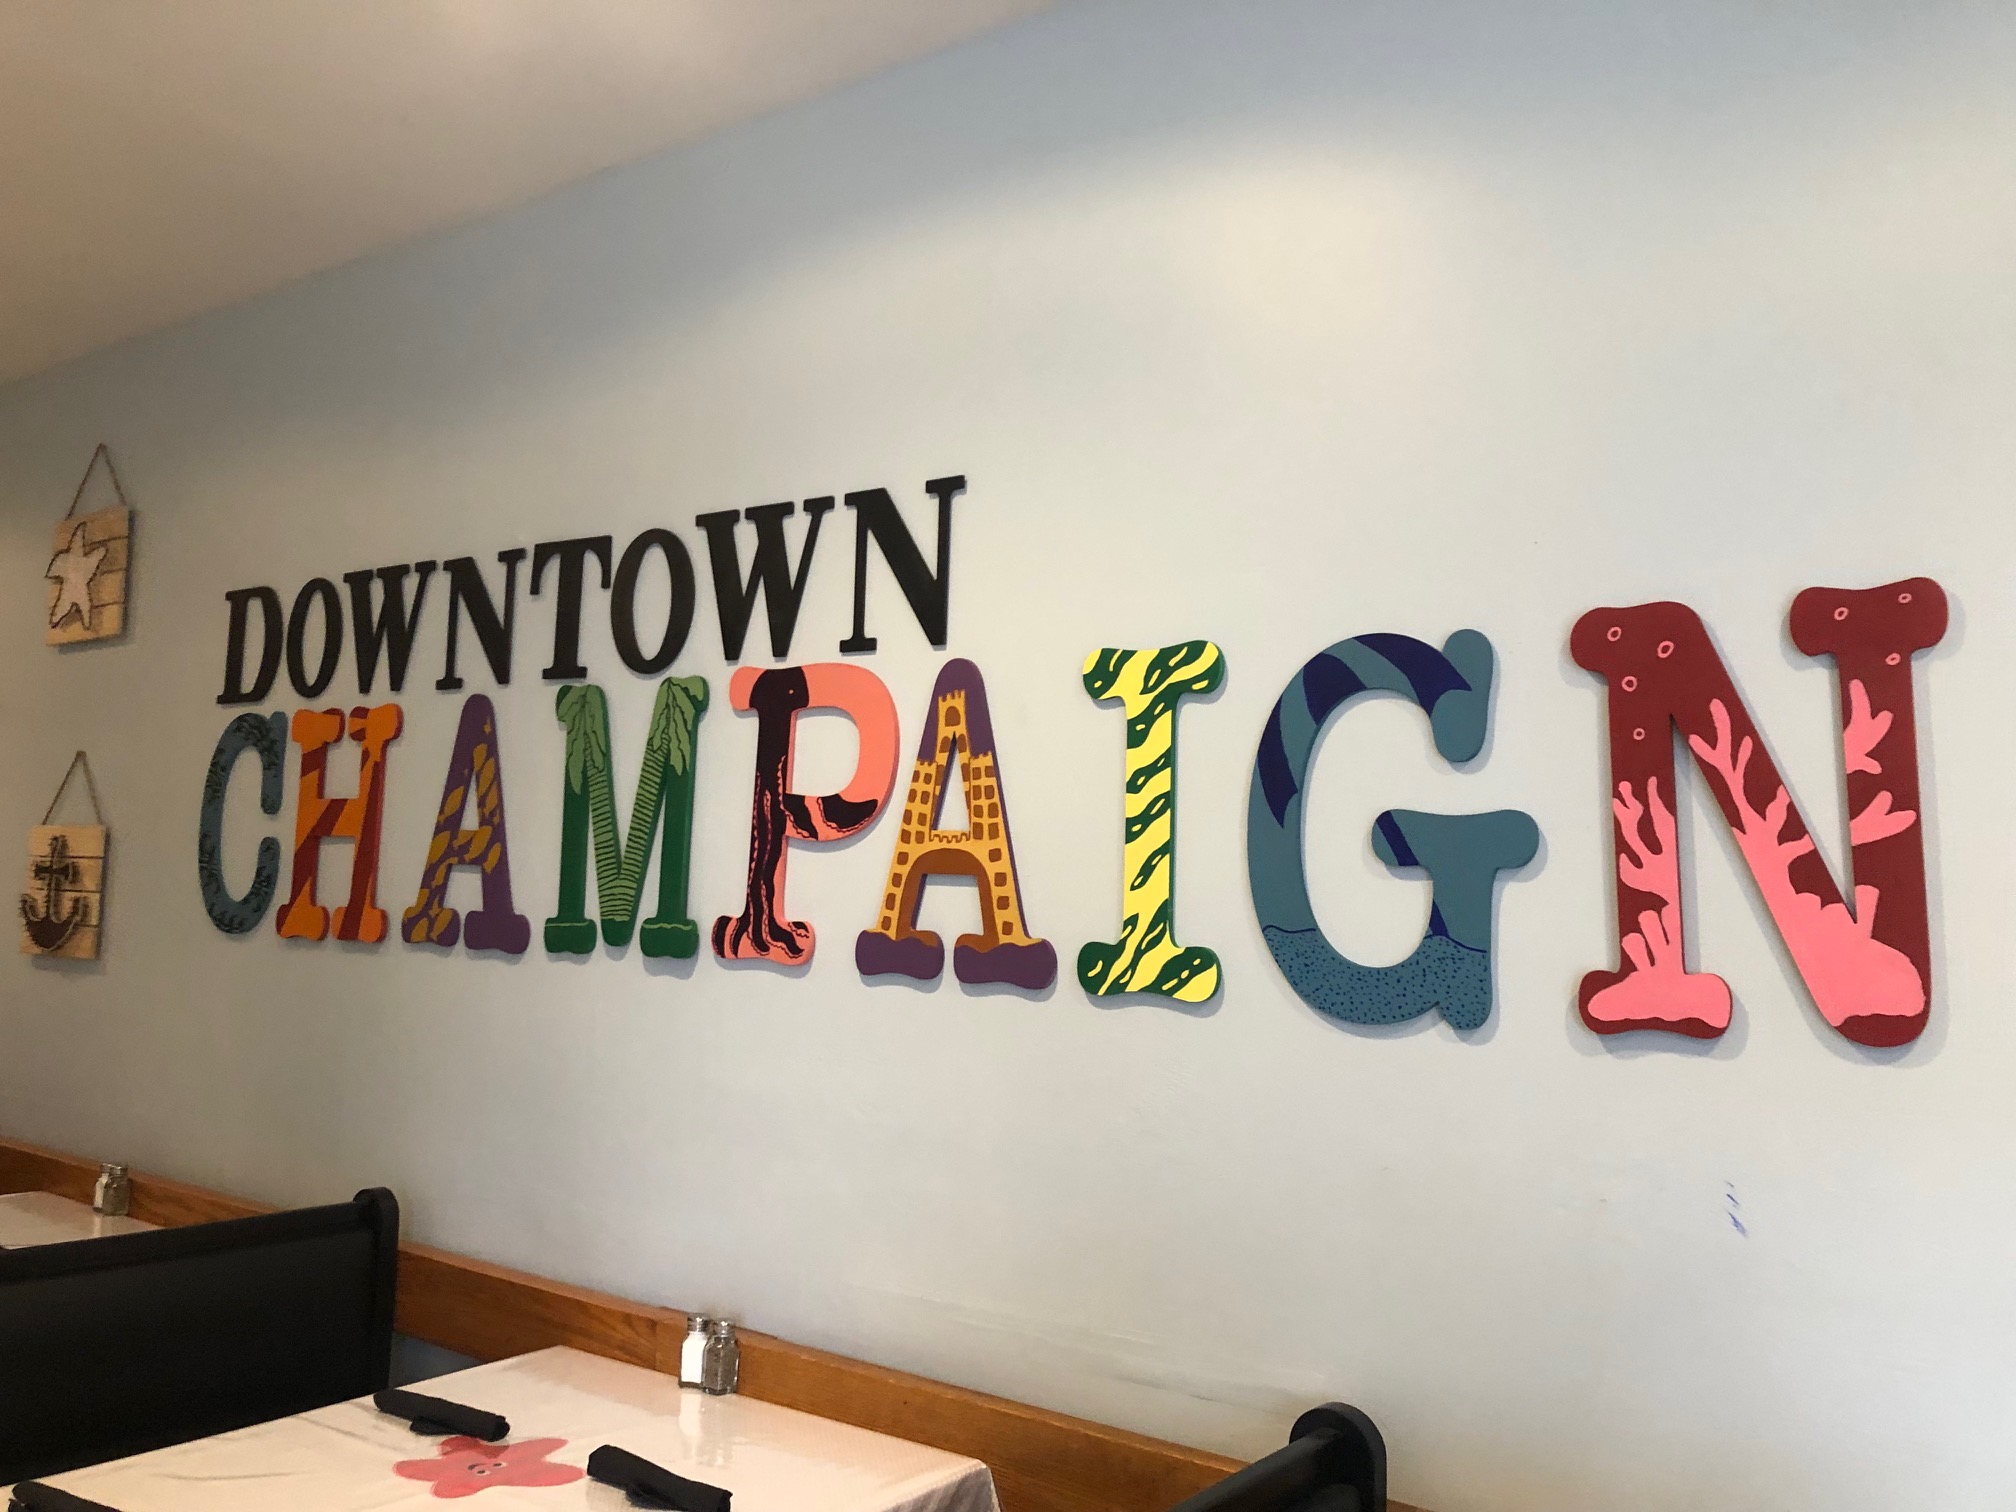 On the wall of La Bahia Grill's dining room, there are letters painted in different colors and animal prints reading DOWNTOWN CHAMPAIGN. Photo by Alyssa Buckley.